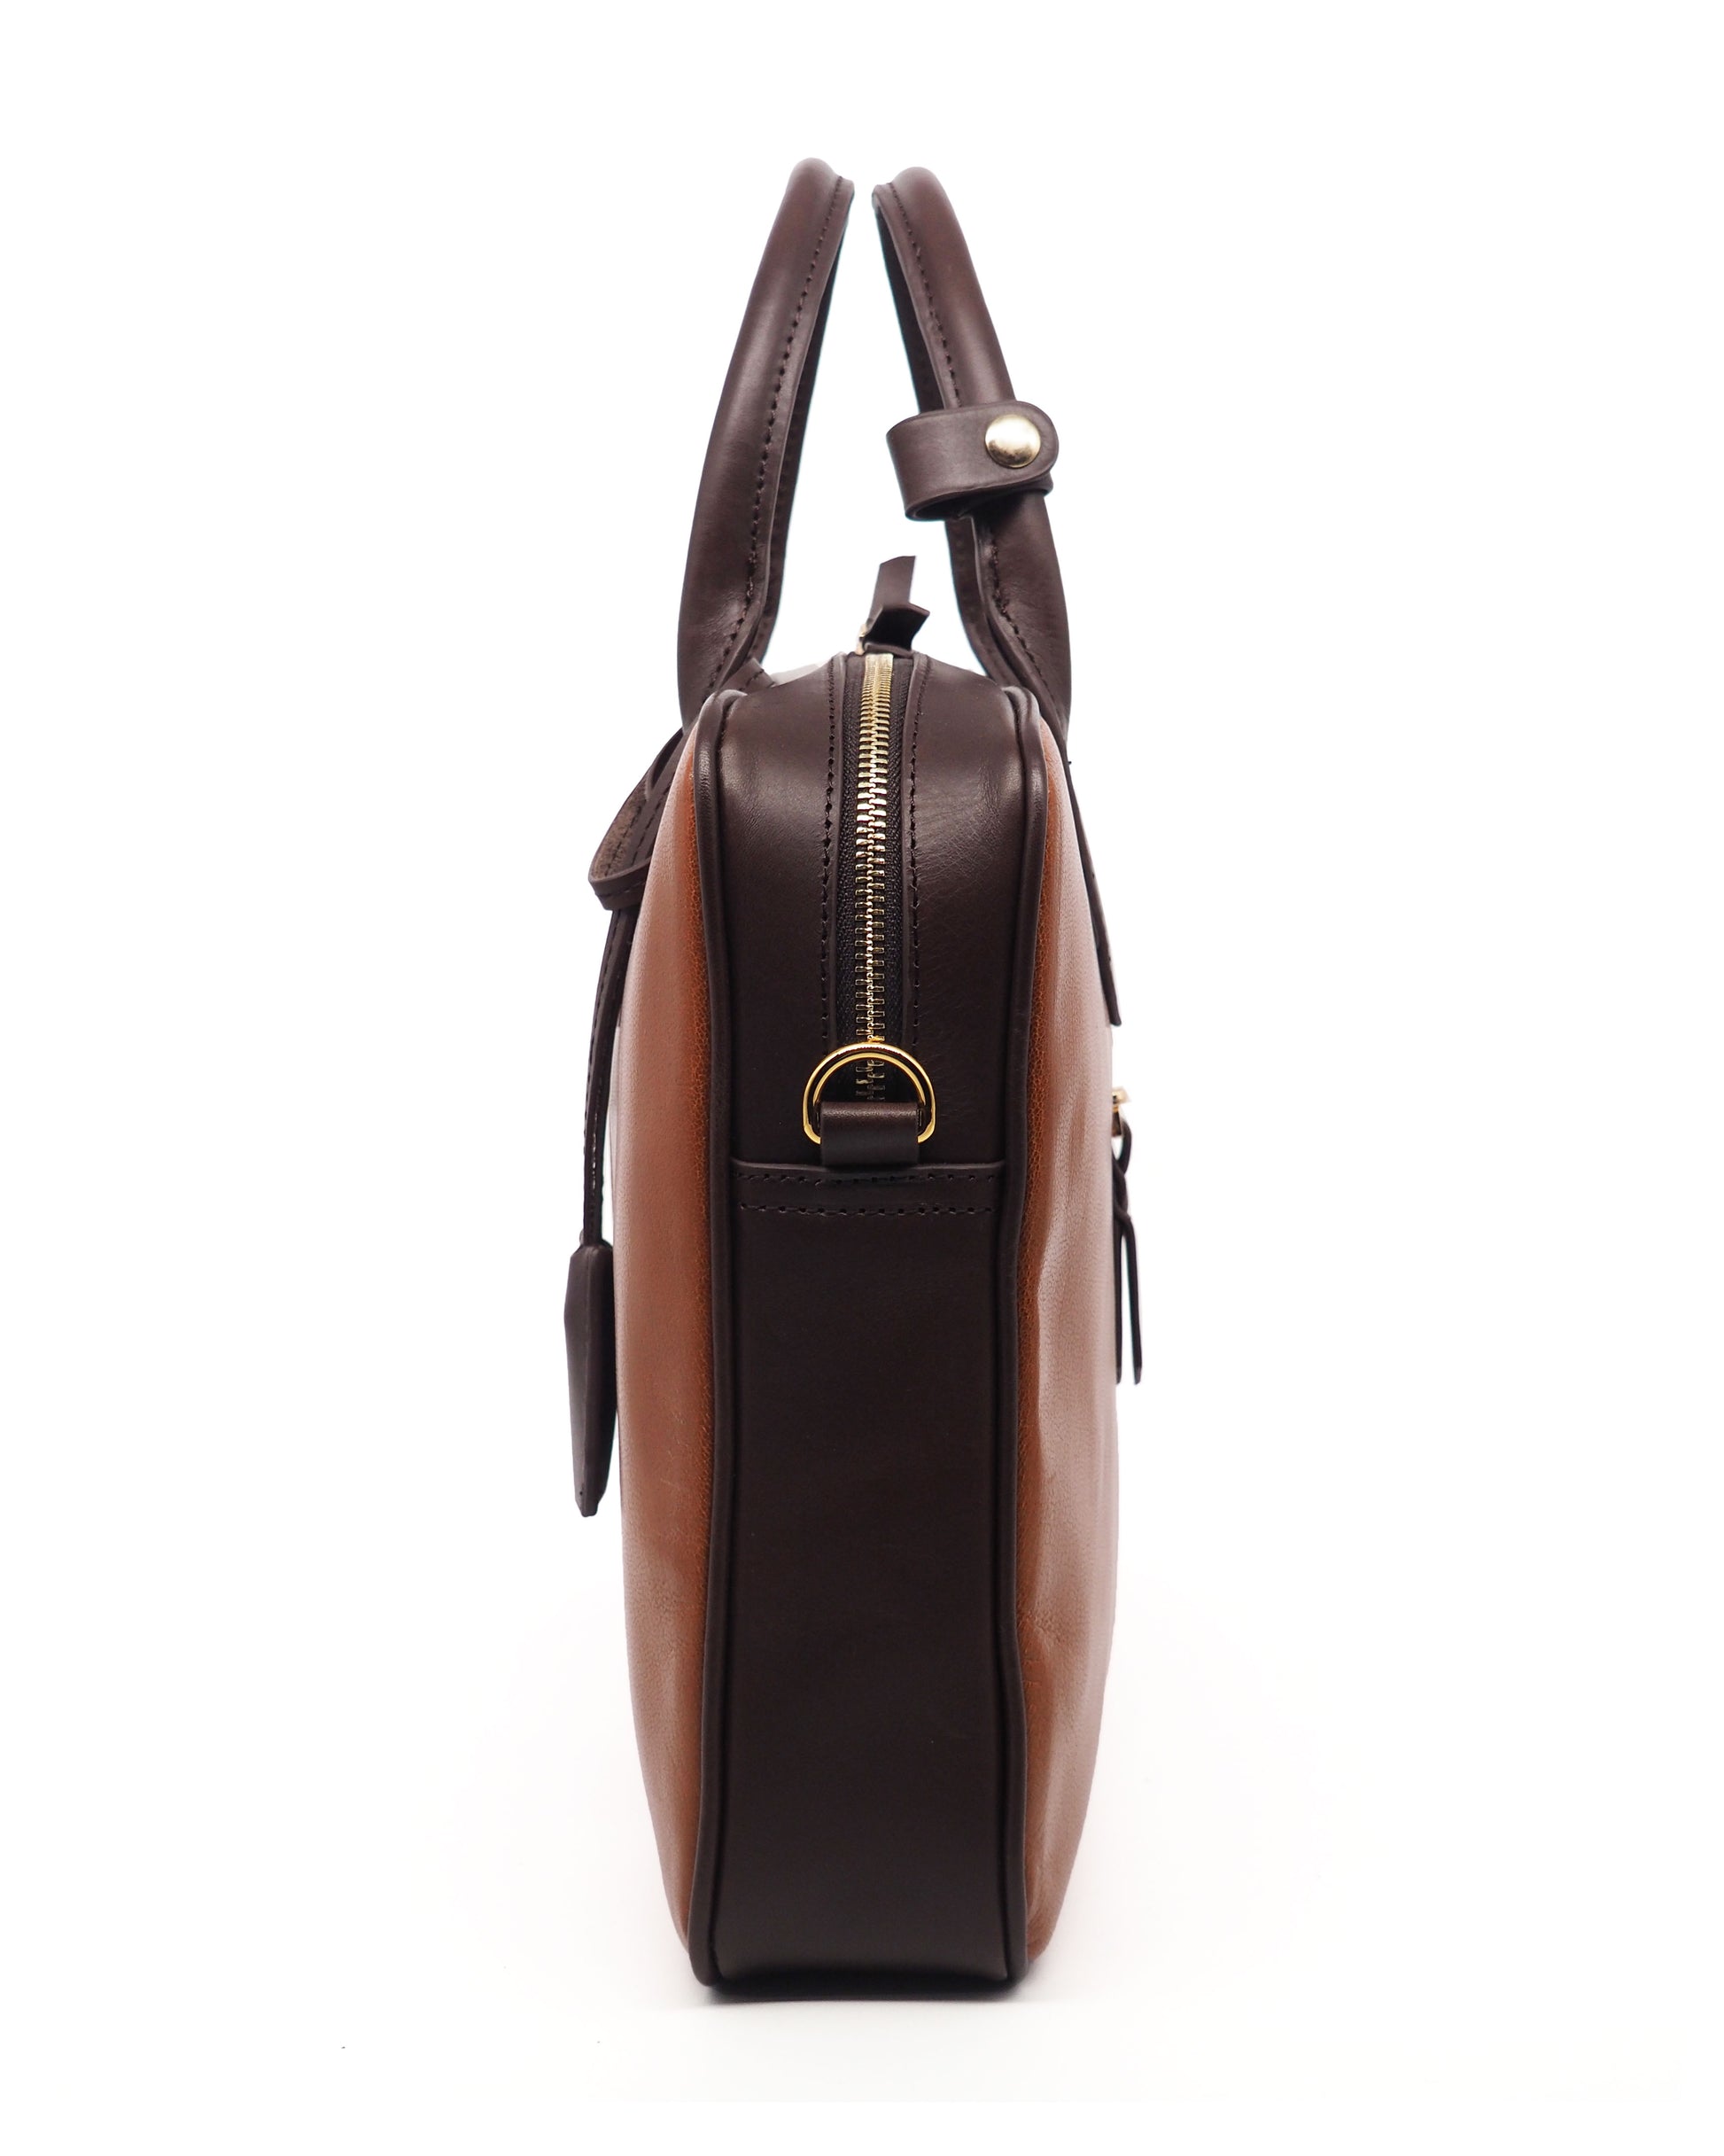 Single Strap Sling Bag by Capra Leather